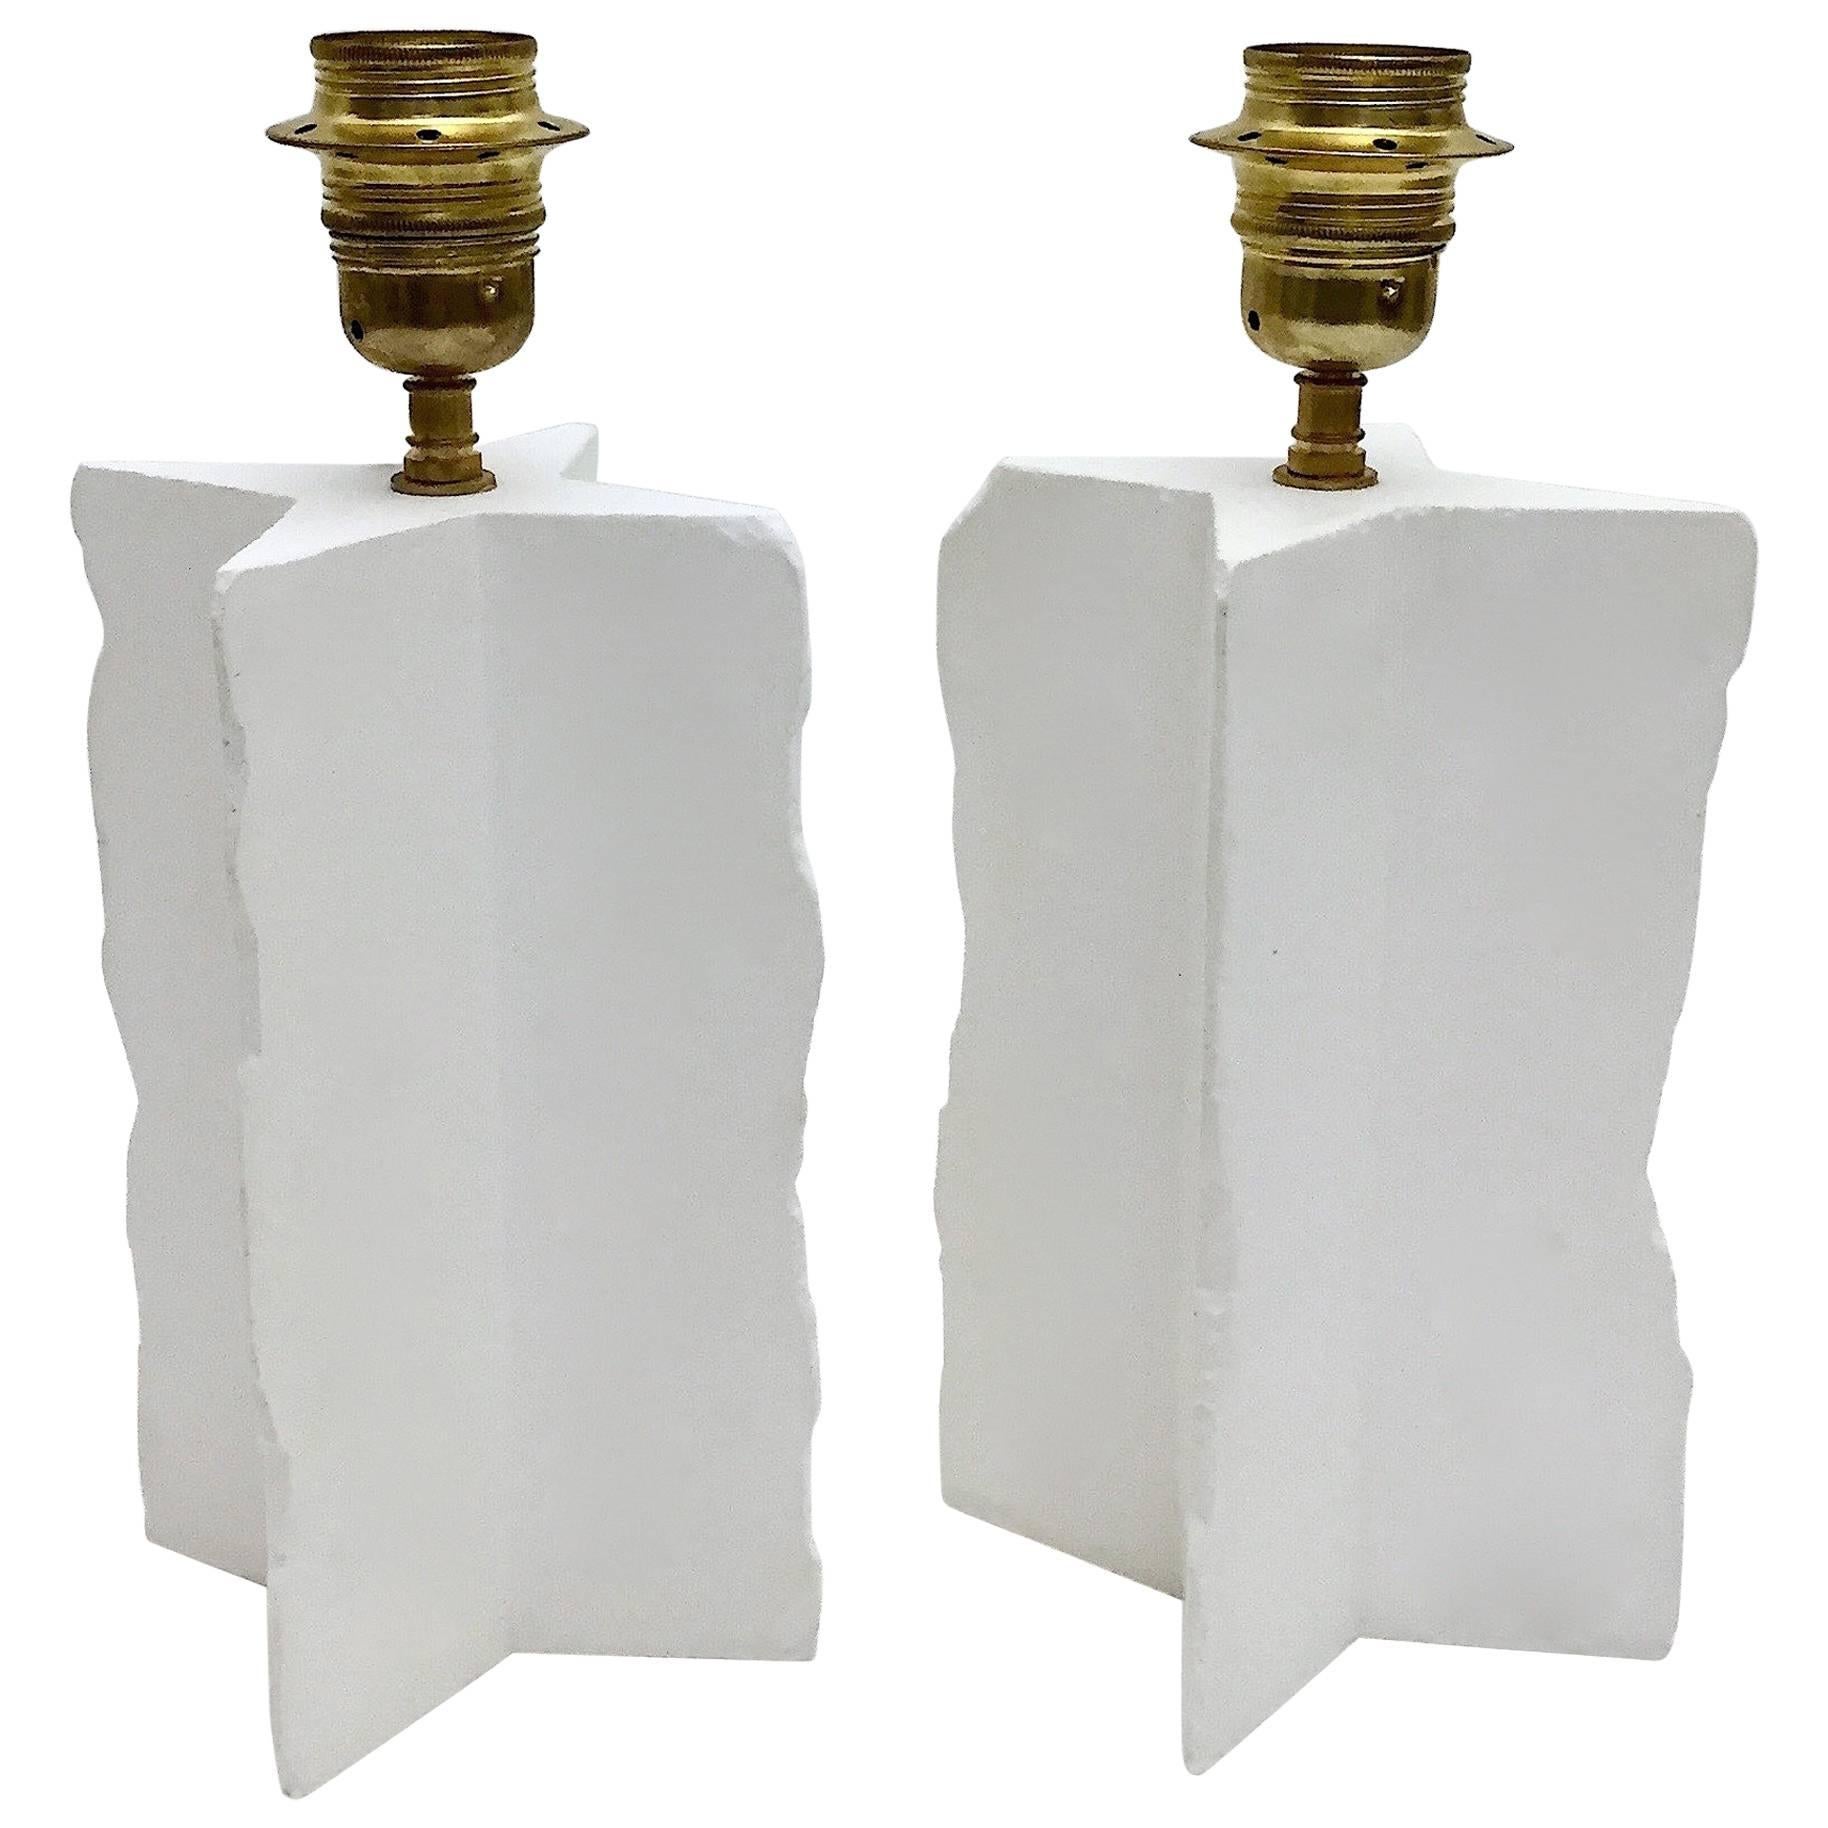 Pair of White Plaster Lamp-Bases Forming a Cross